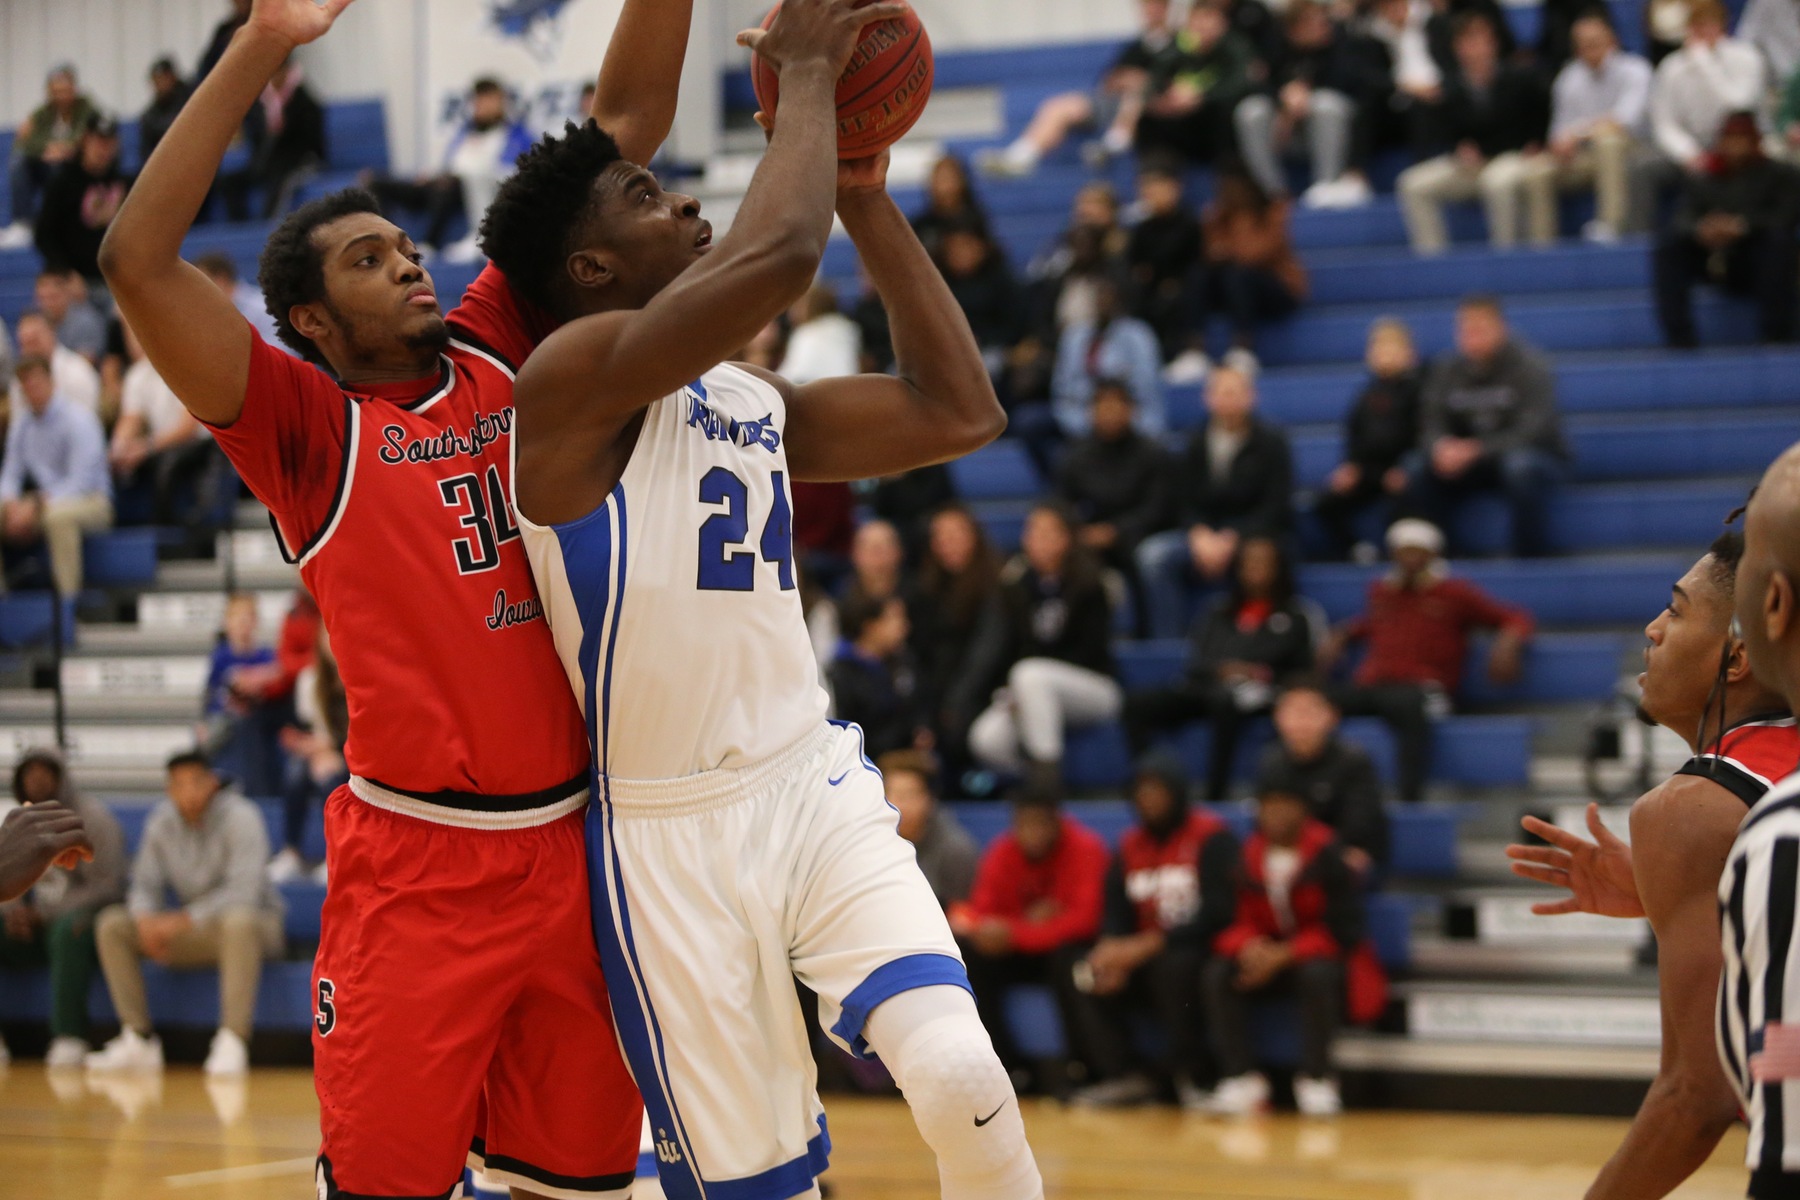 Emmanuel Ugboh helped lead ten-win Iowa Western over ten-win Northwest Kansas Tech to an 84-73 victory in the championship game of the Iowa Western Basketball Classic.